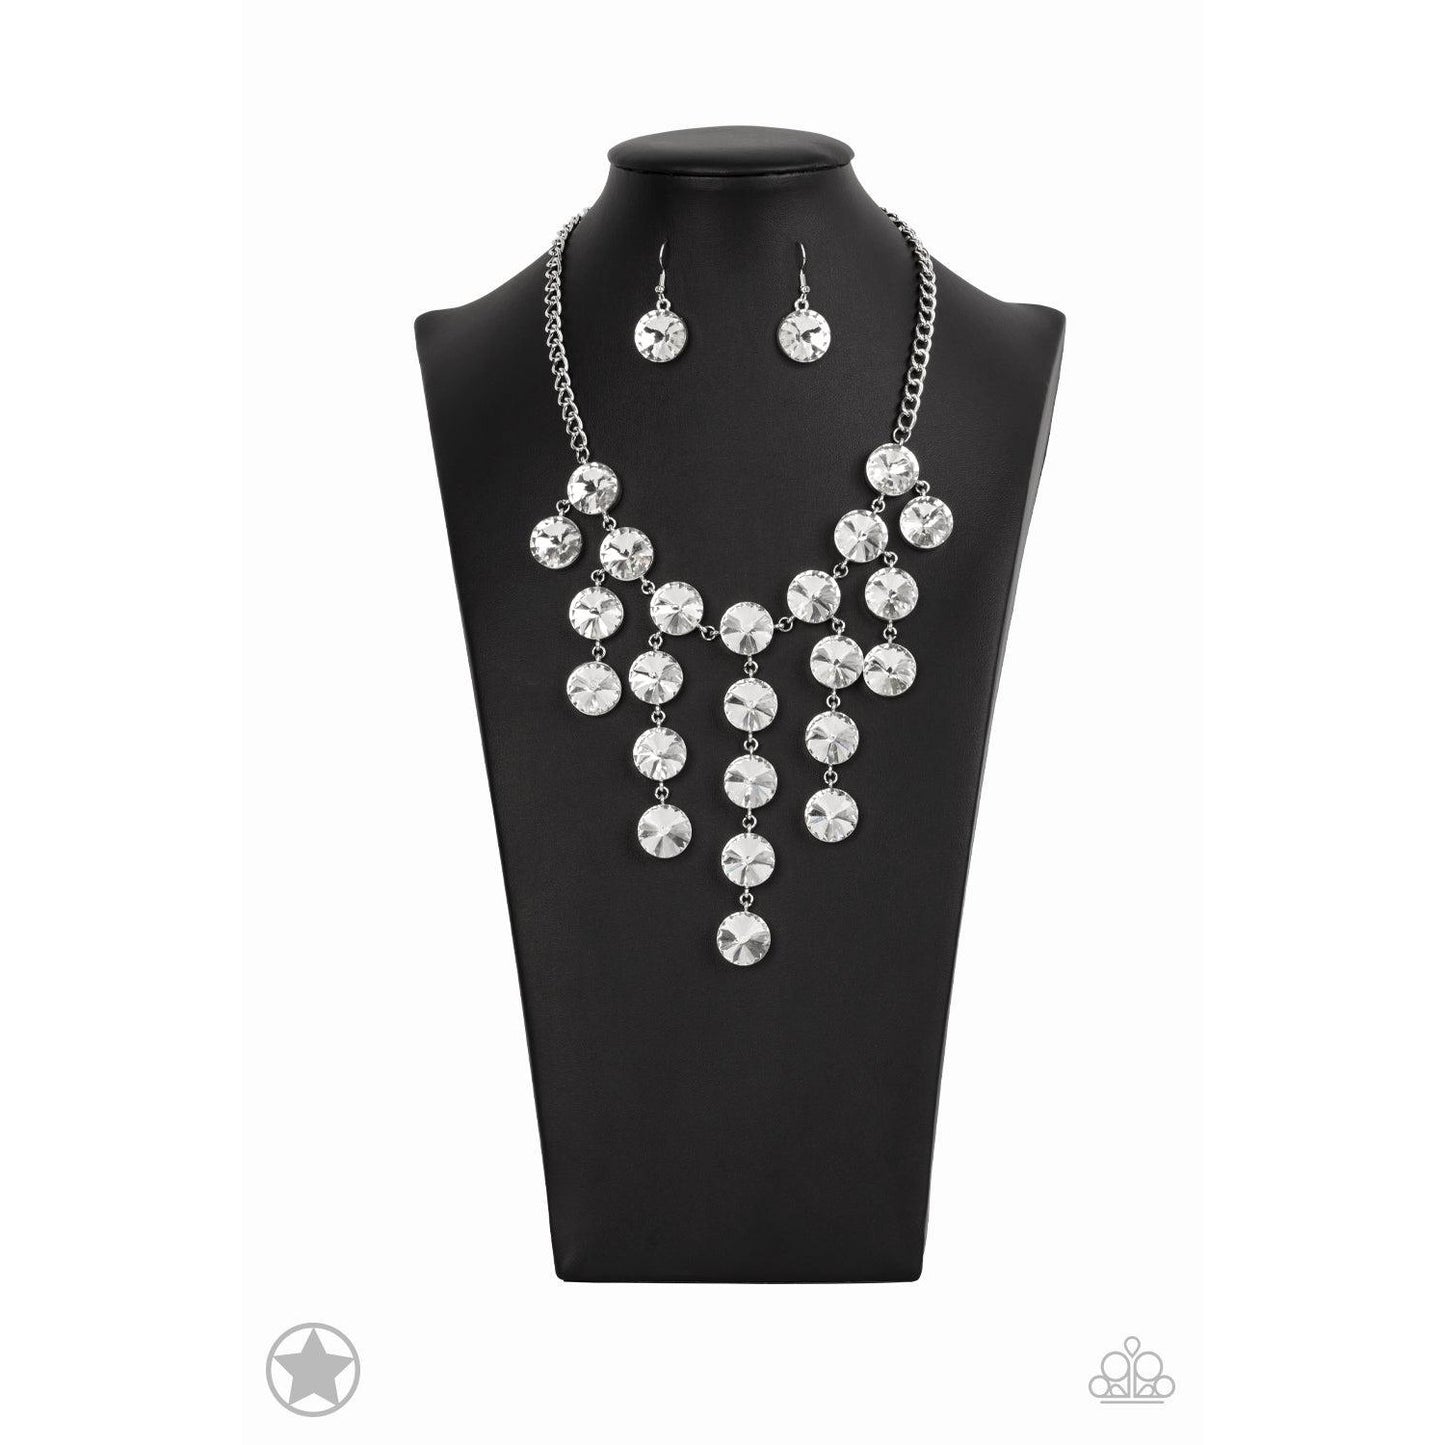 Spotlight Stunner - White Rhinestone Blockbuster Necklace - A Large Selection Hand-Chains And Jewelry On rainbowartsreview,Women's Jewelry | Necklaces, Earrings, Bracelets